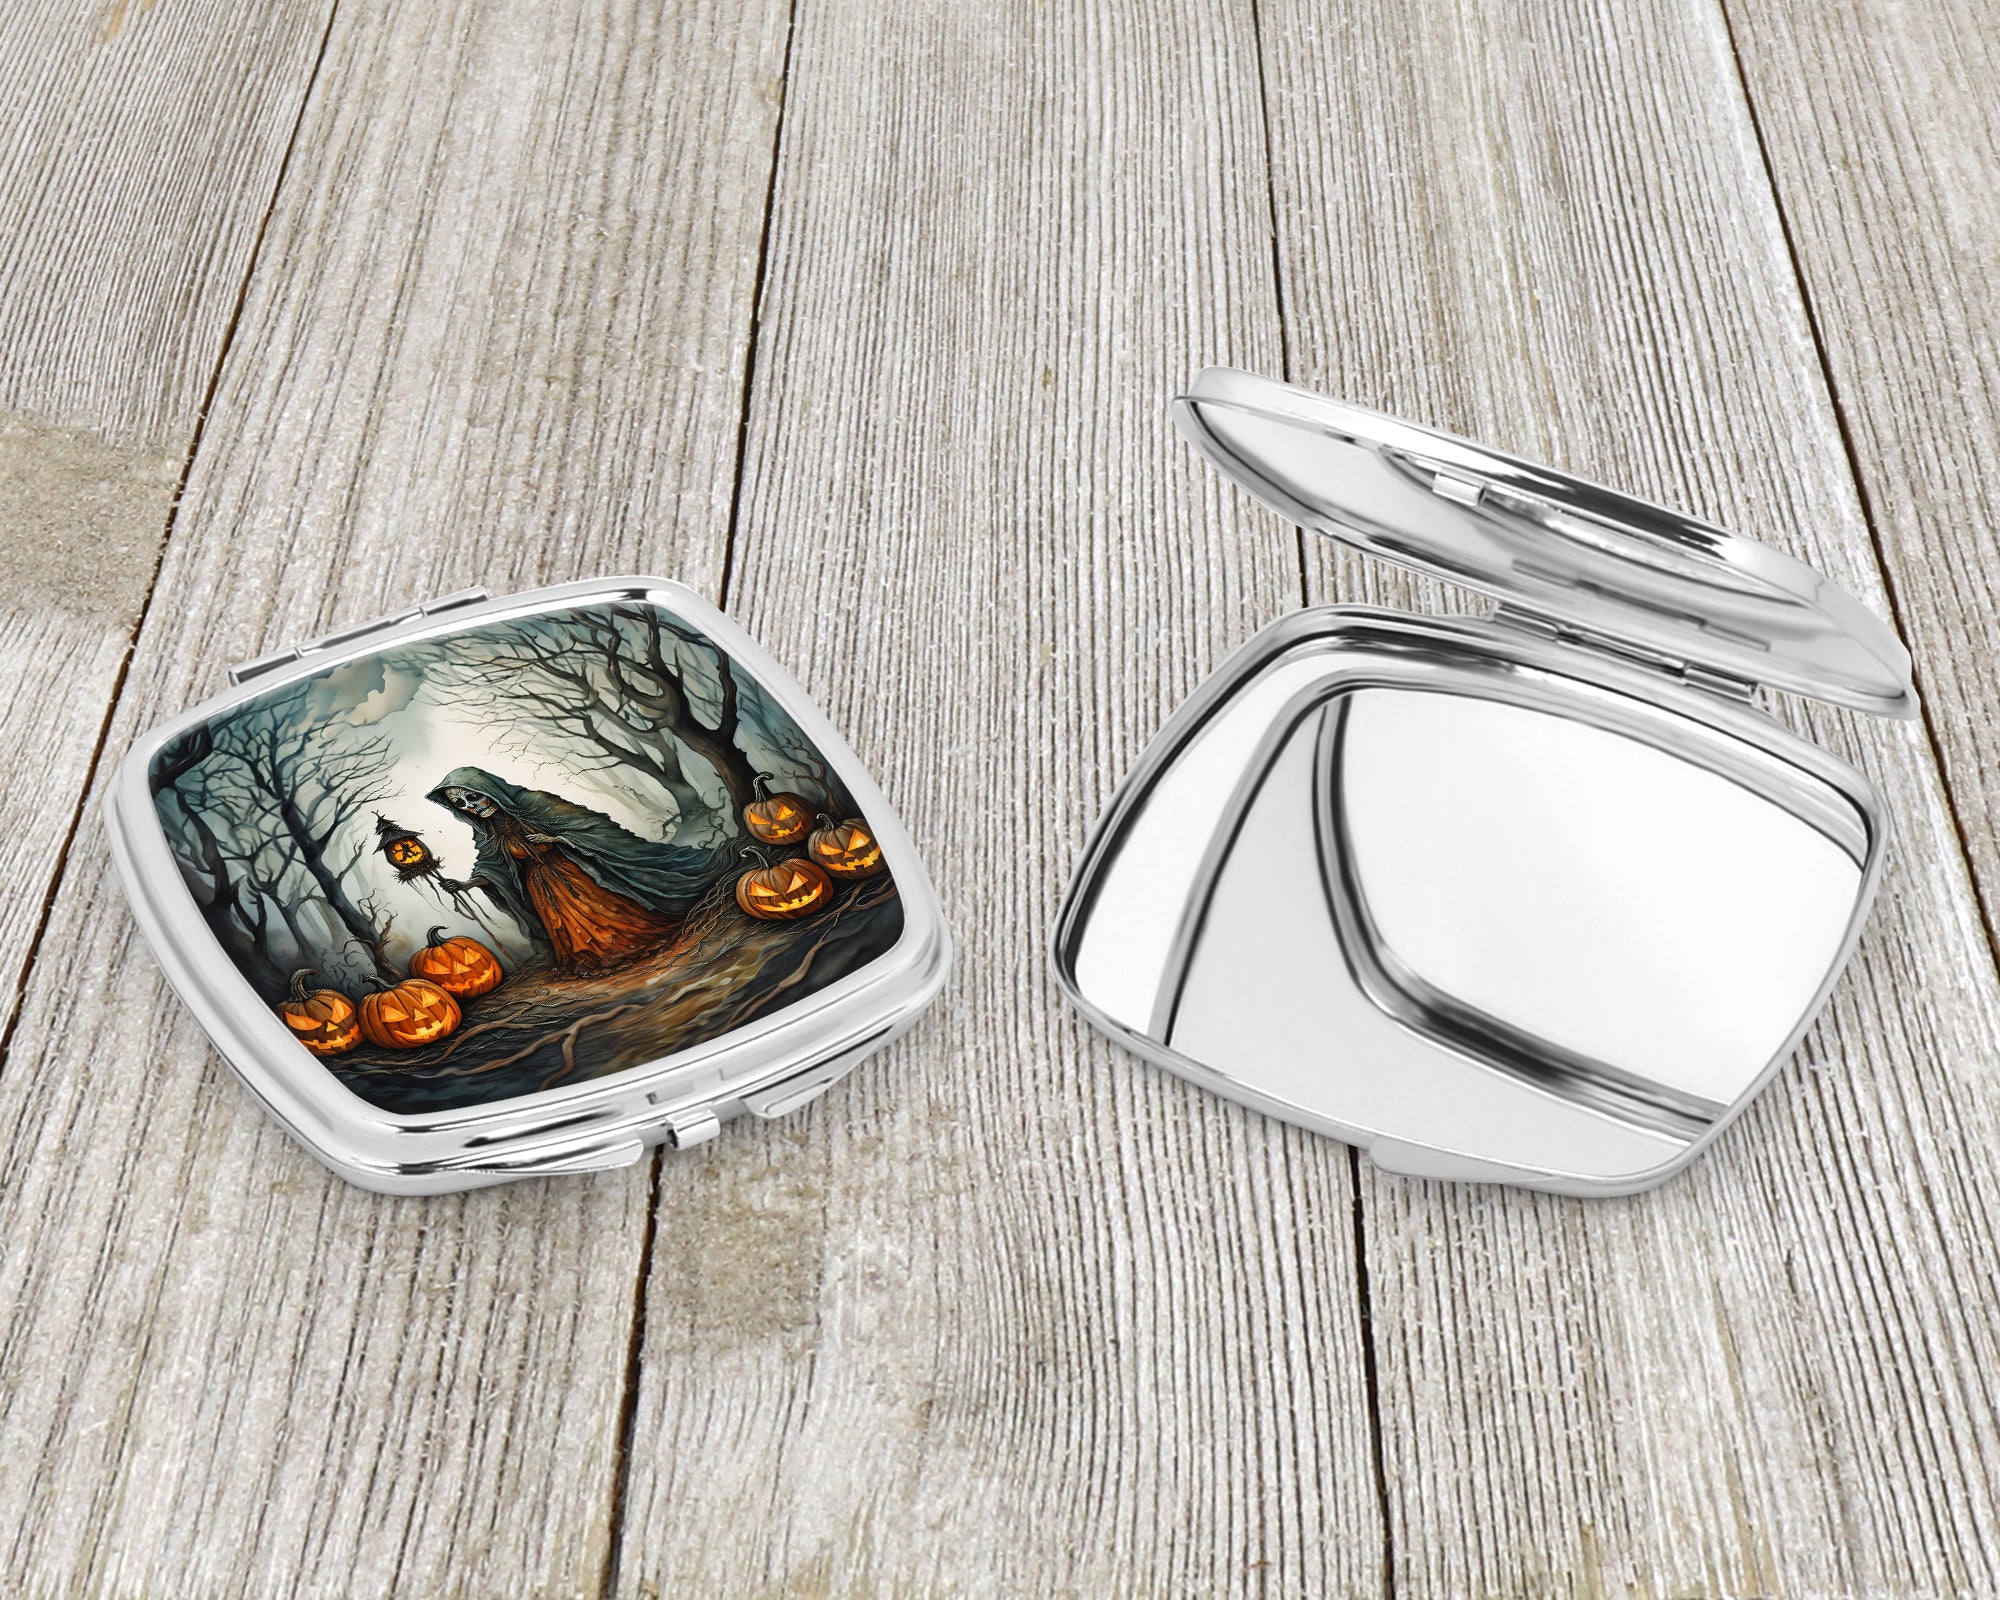 The Weeping Woman Spooky Halloween Compact Mirror